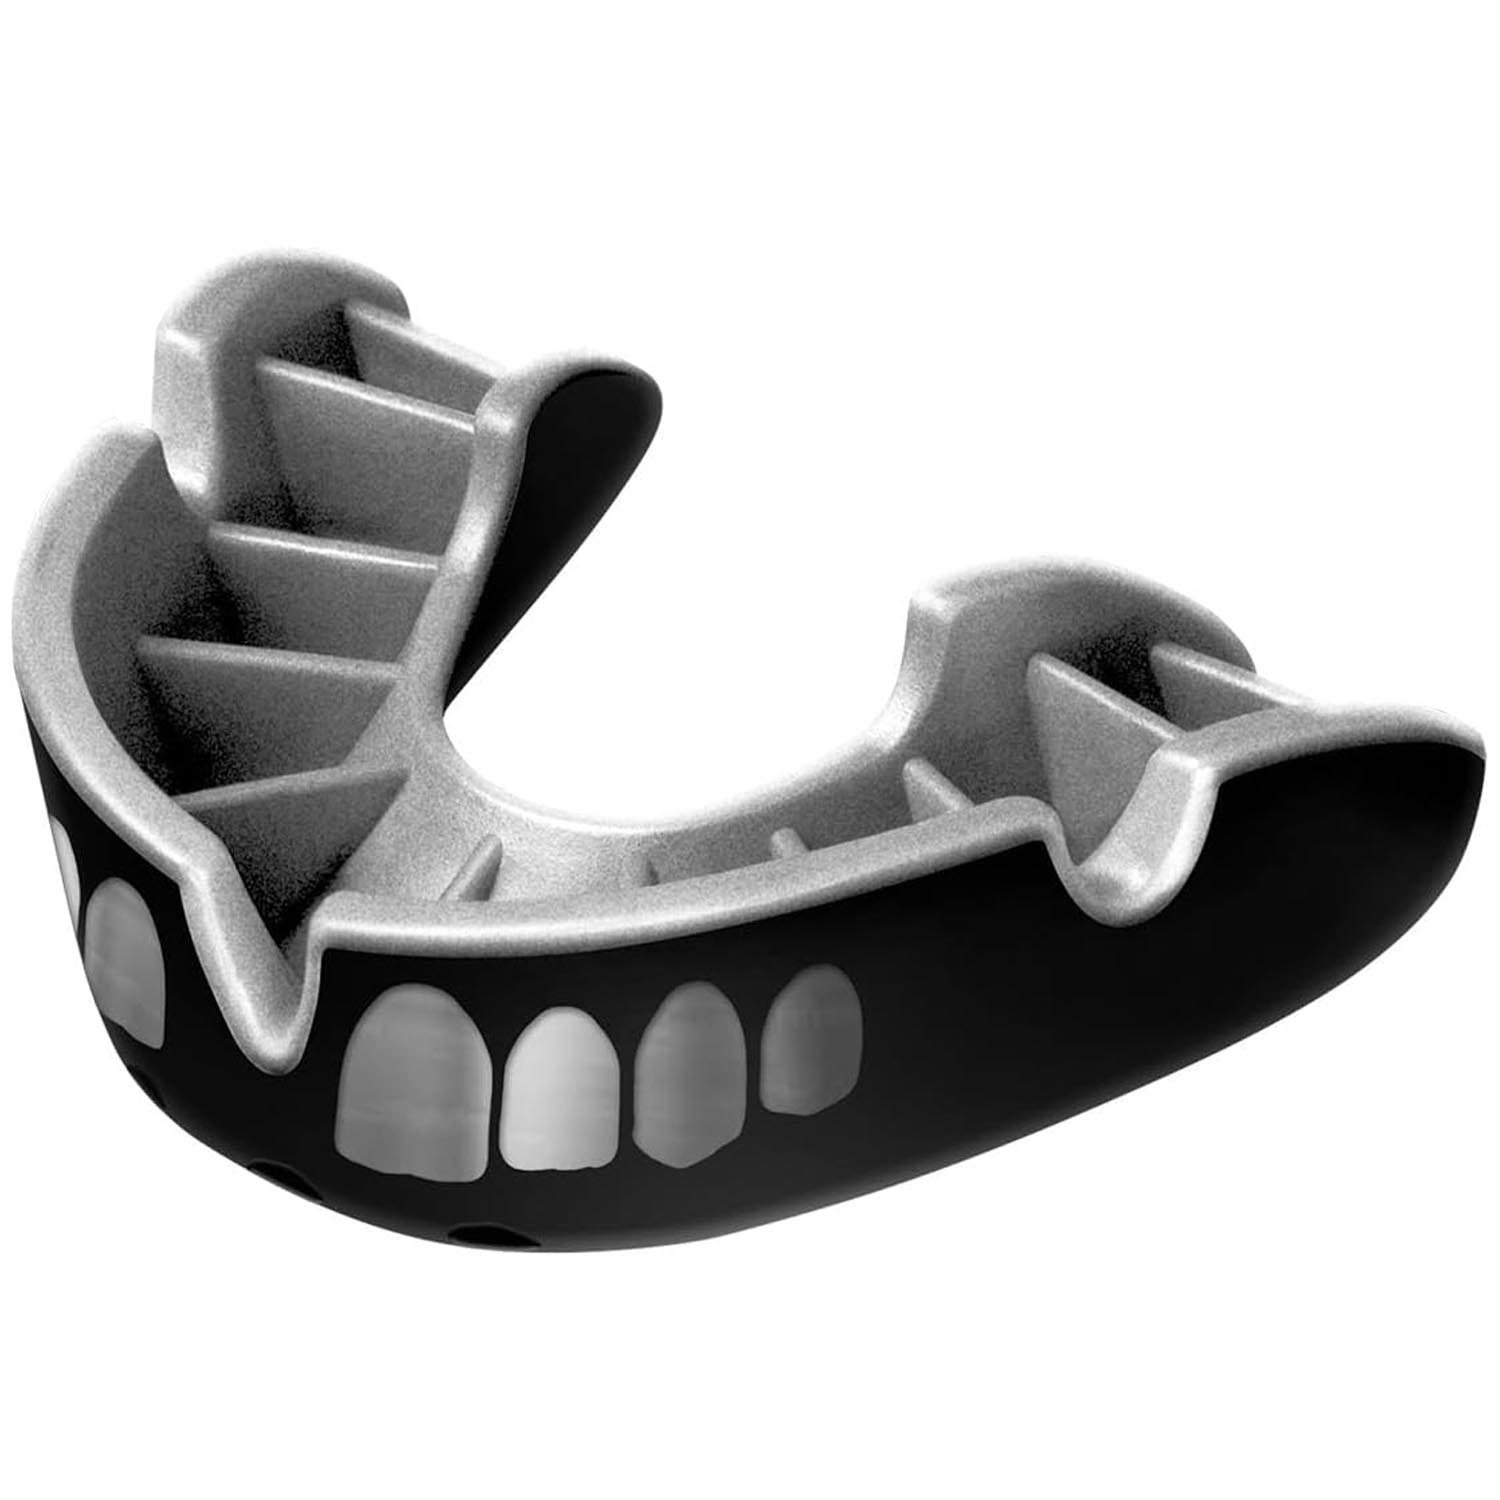 OPRO Mouthguards, Silver Grillz 2022, black-silver